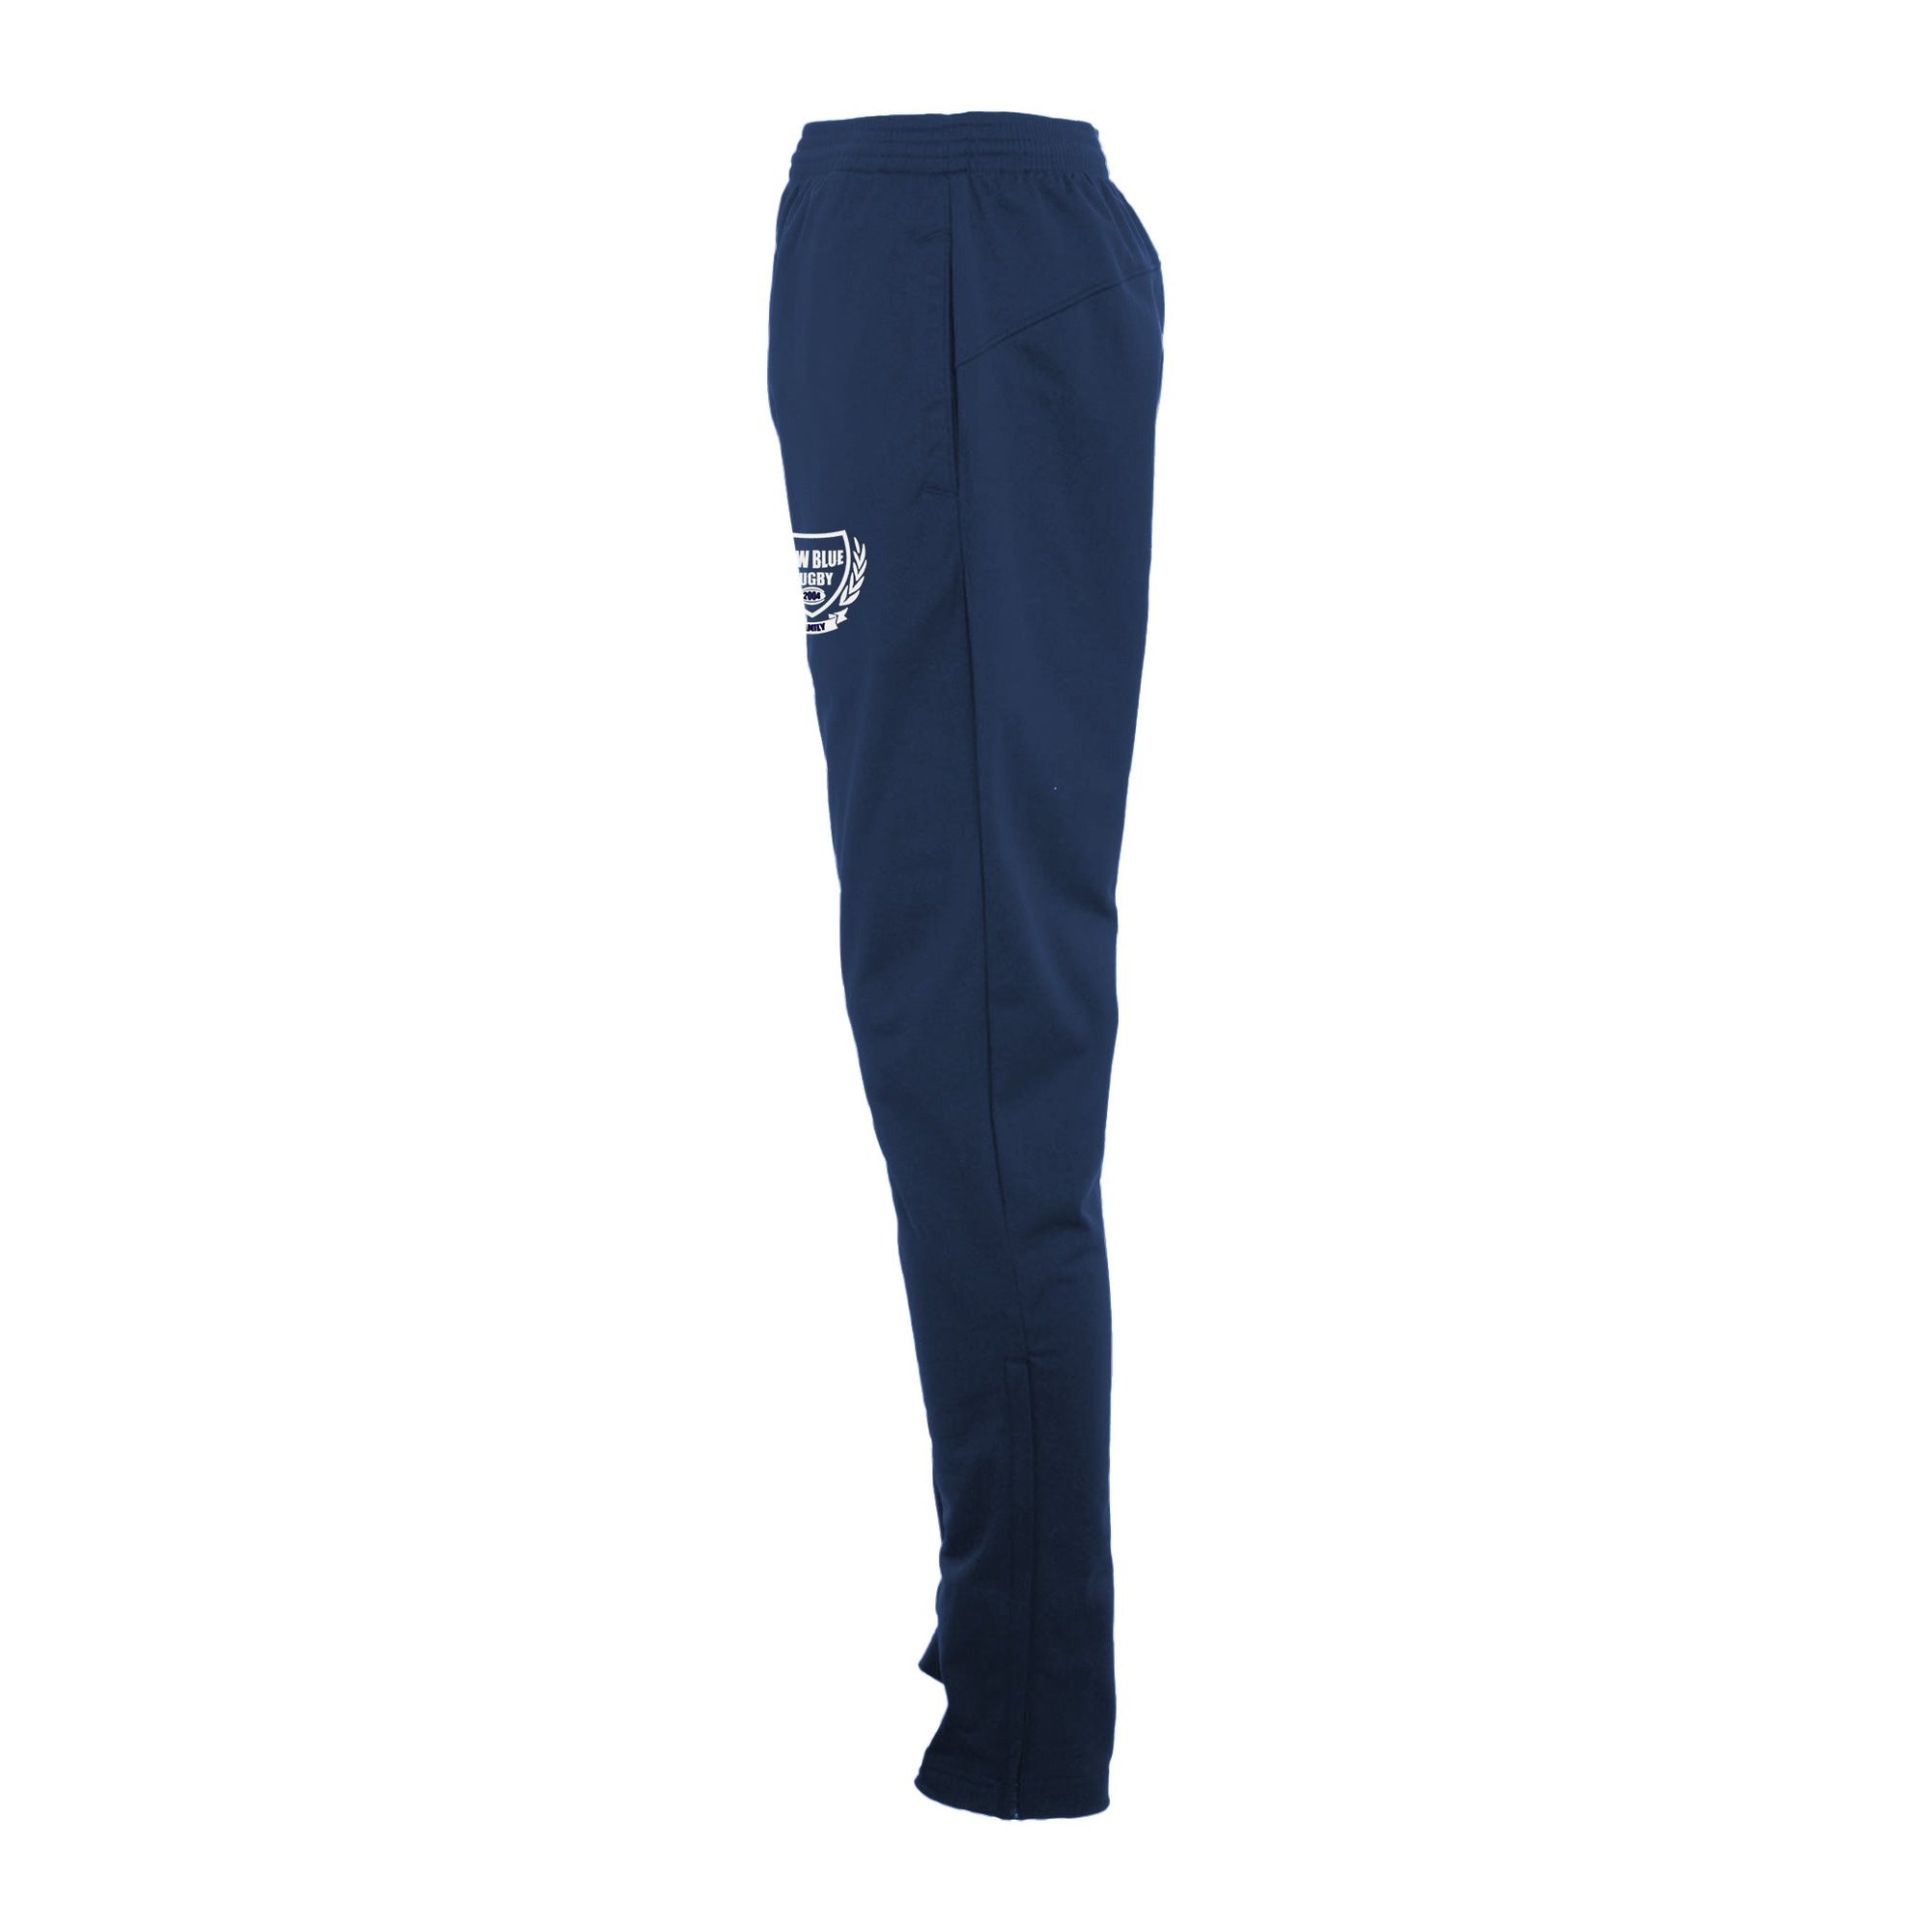 Rugby Imports New Blue Unisex Tapered Leg Pant